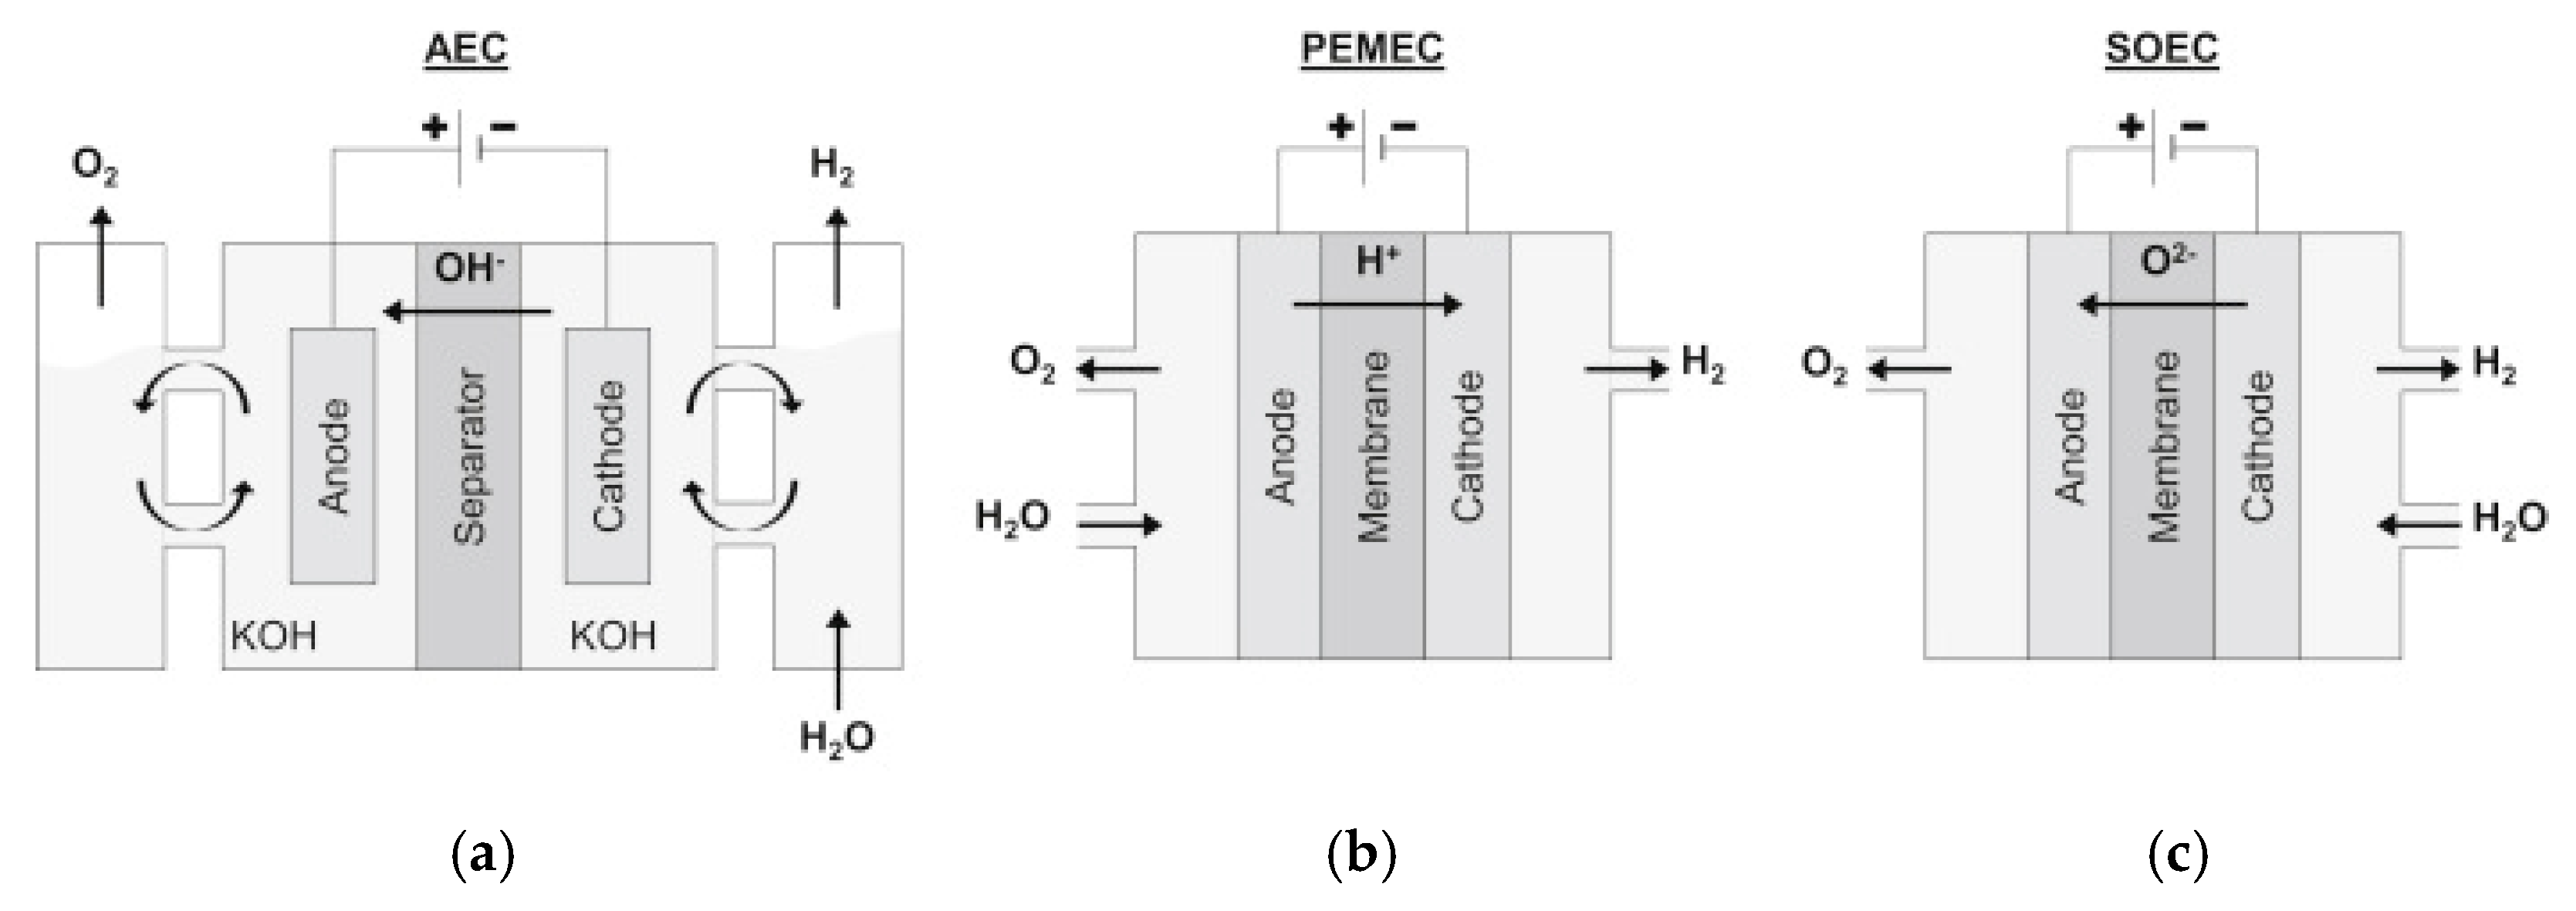 Energies | Free Full-Text | Towards the Hydrogen Economy—A Review of the  Parameters That Influence the Efficiency of Alkaline Water Electrolyzers |  HTML